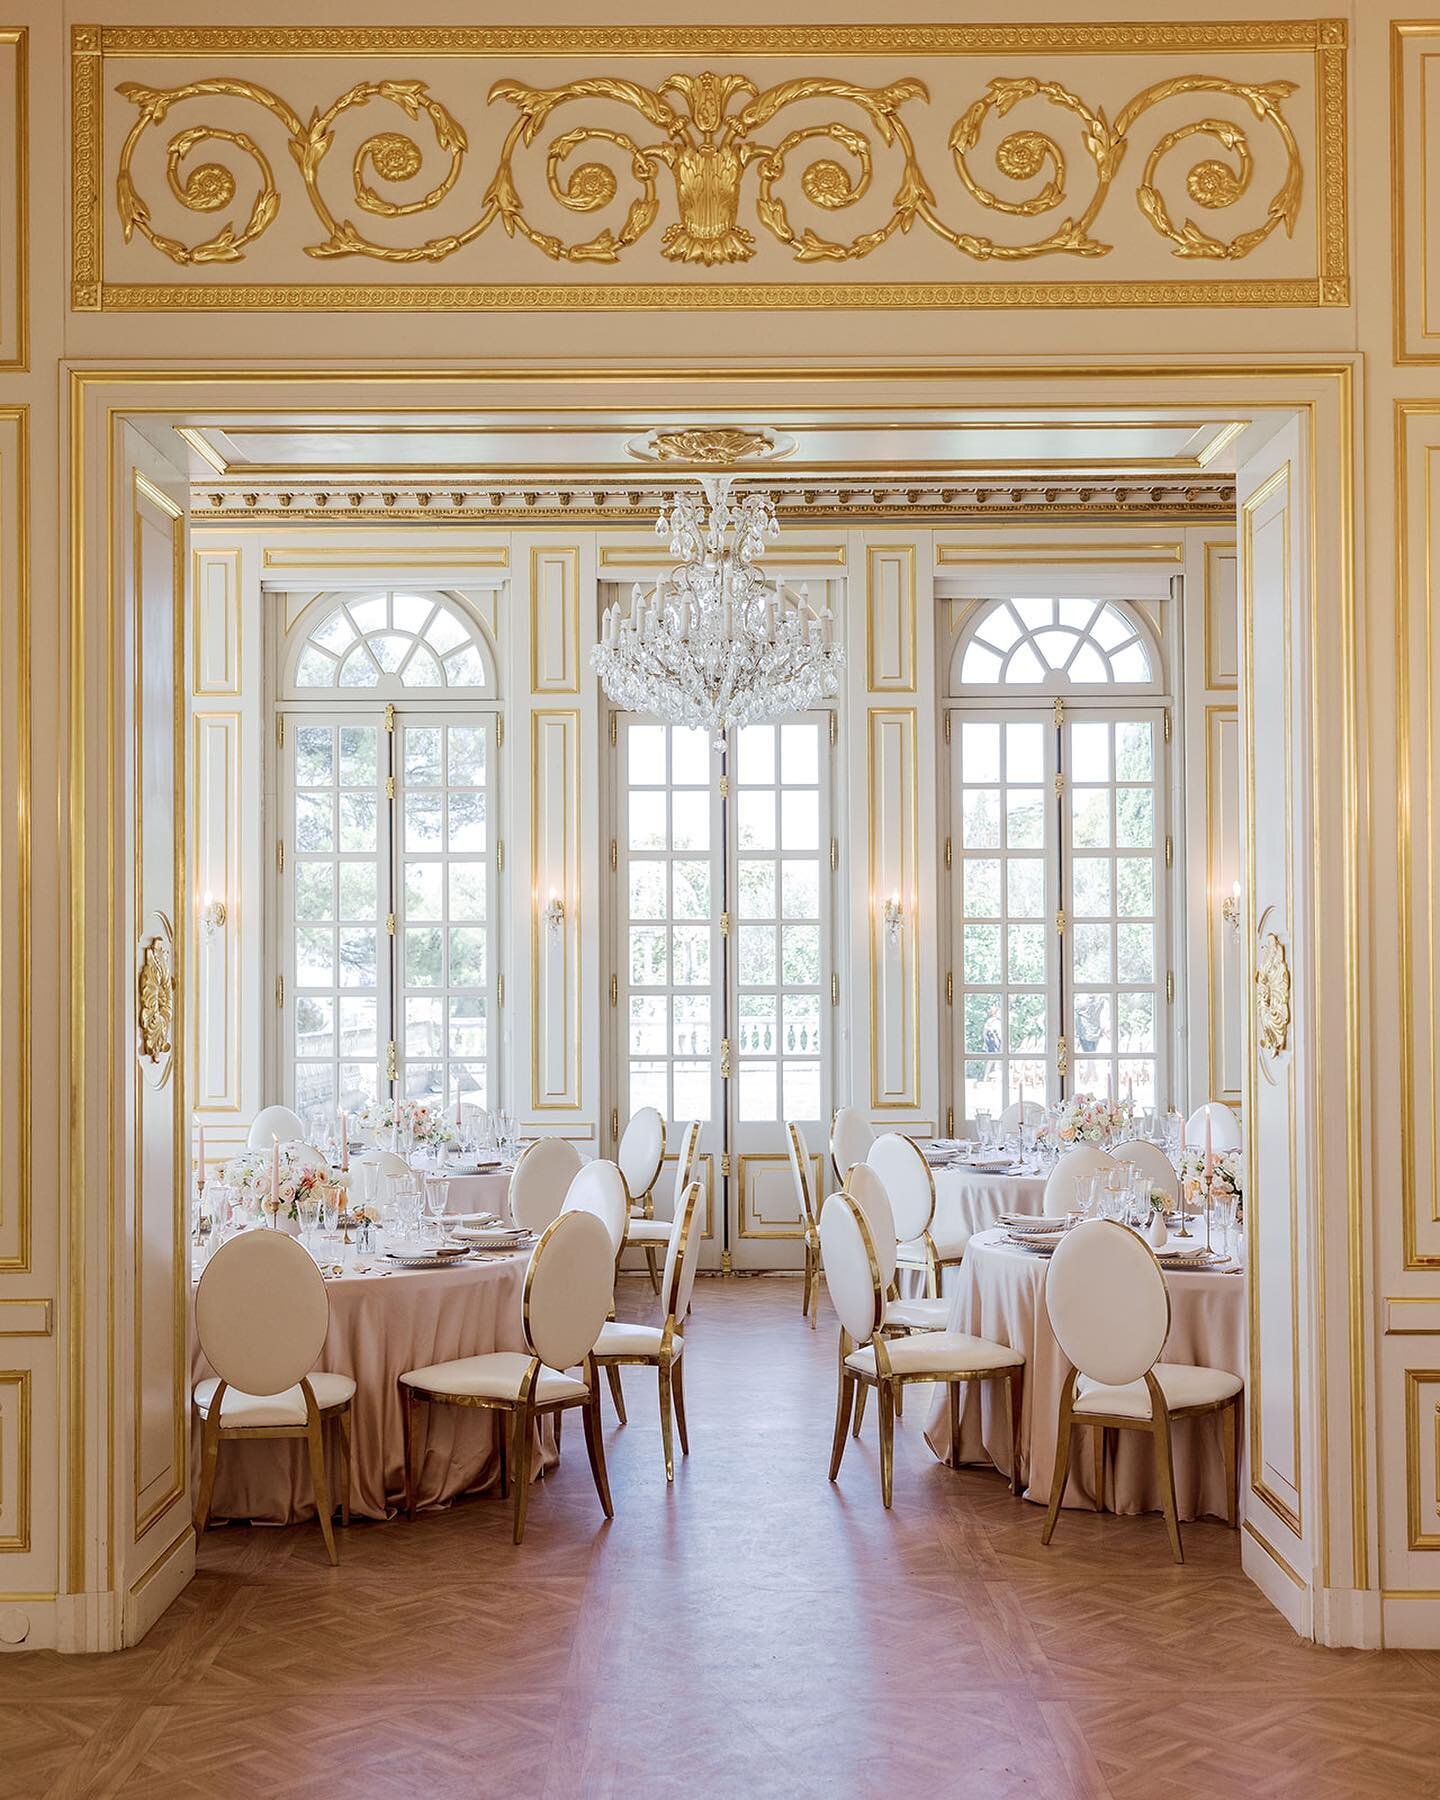 Pure magic at @chateausaintgeorges captured by the amazing @redamancyphotofilm ✨
.
. 
Photos: @redamancyphotofilm 
Venue: @chateausaintgeorges 
Workshop Host: @amv_retreats
Planning, Styling + Design: @amv_weddings
Workshop Educators: @andreaskgeorgi